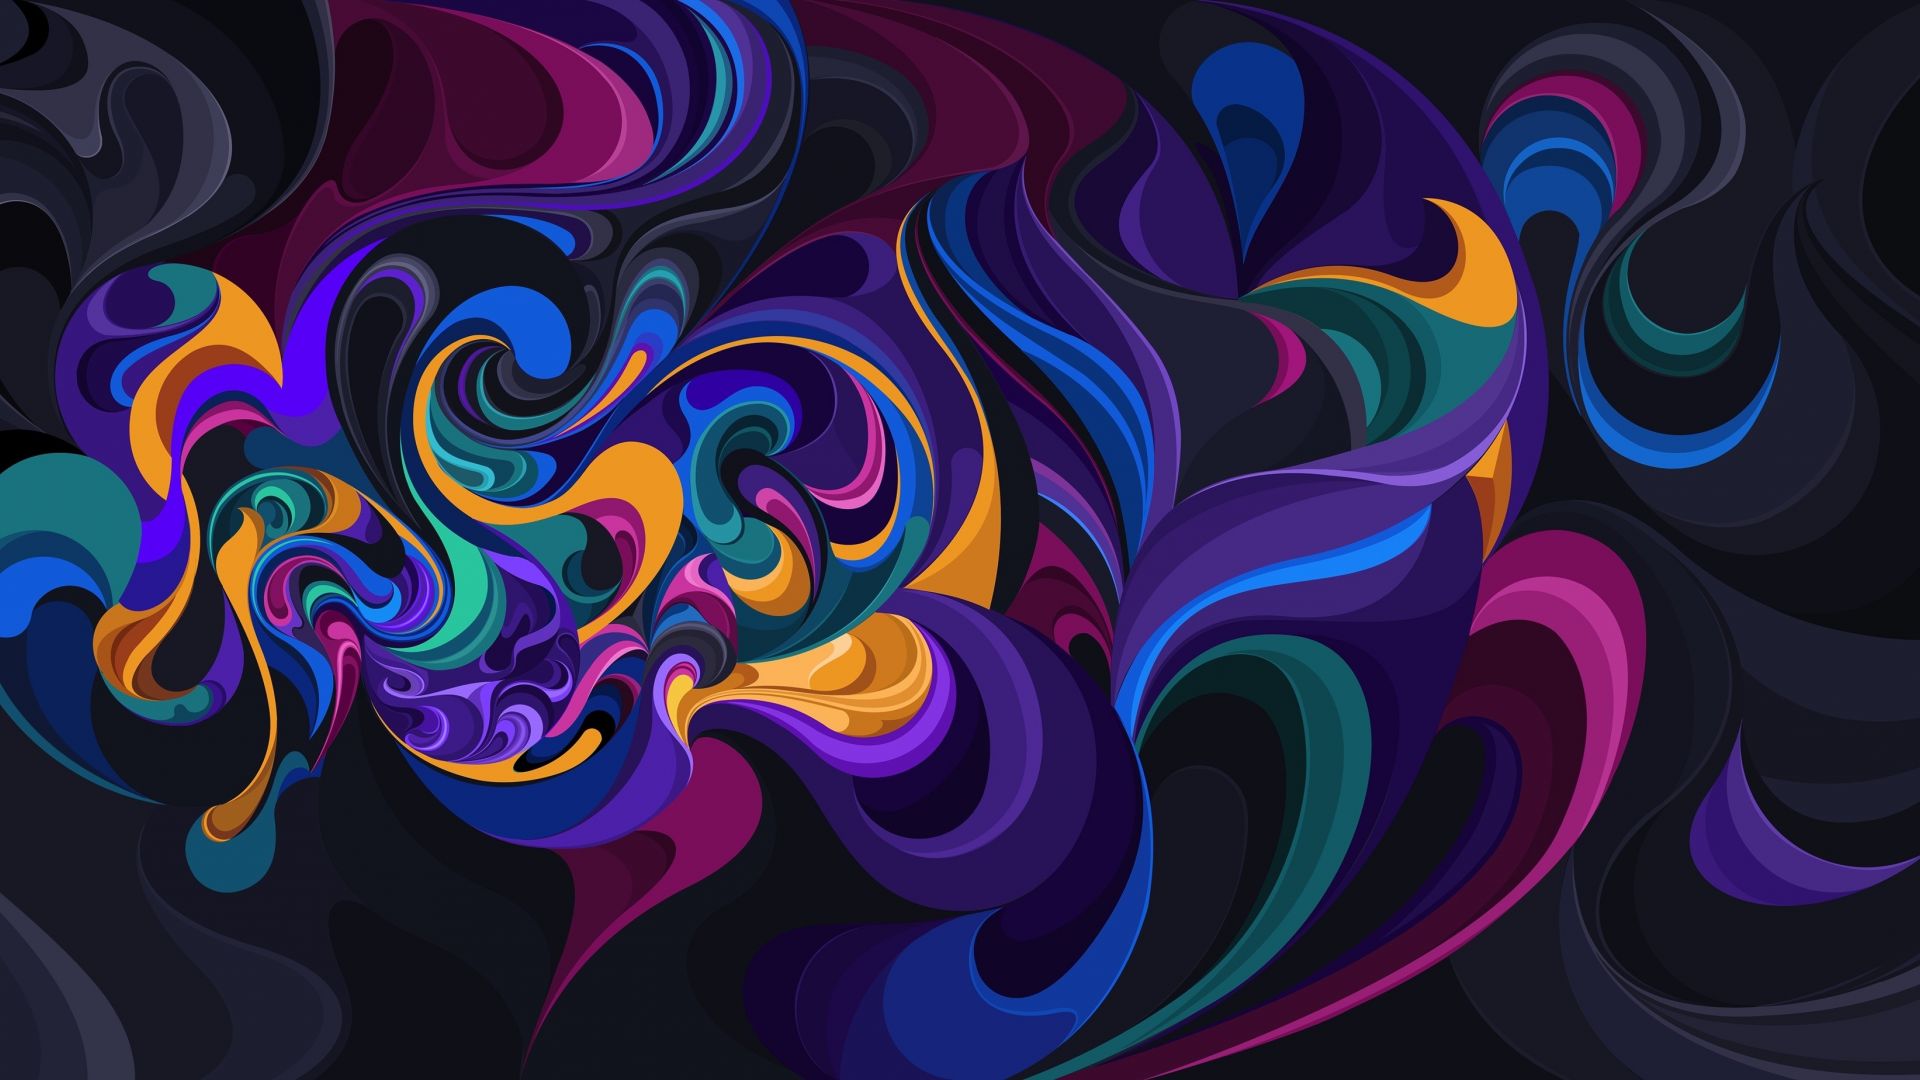 Desktop Wallpaper Colorful, Abstract, Curves, Designs, 4k, HD Image, Picture, Background, E8ef9d